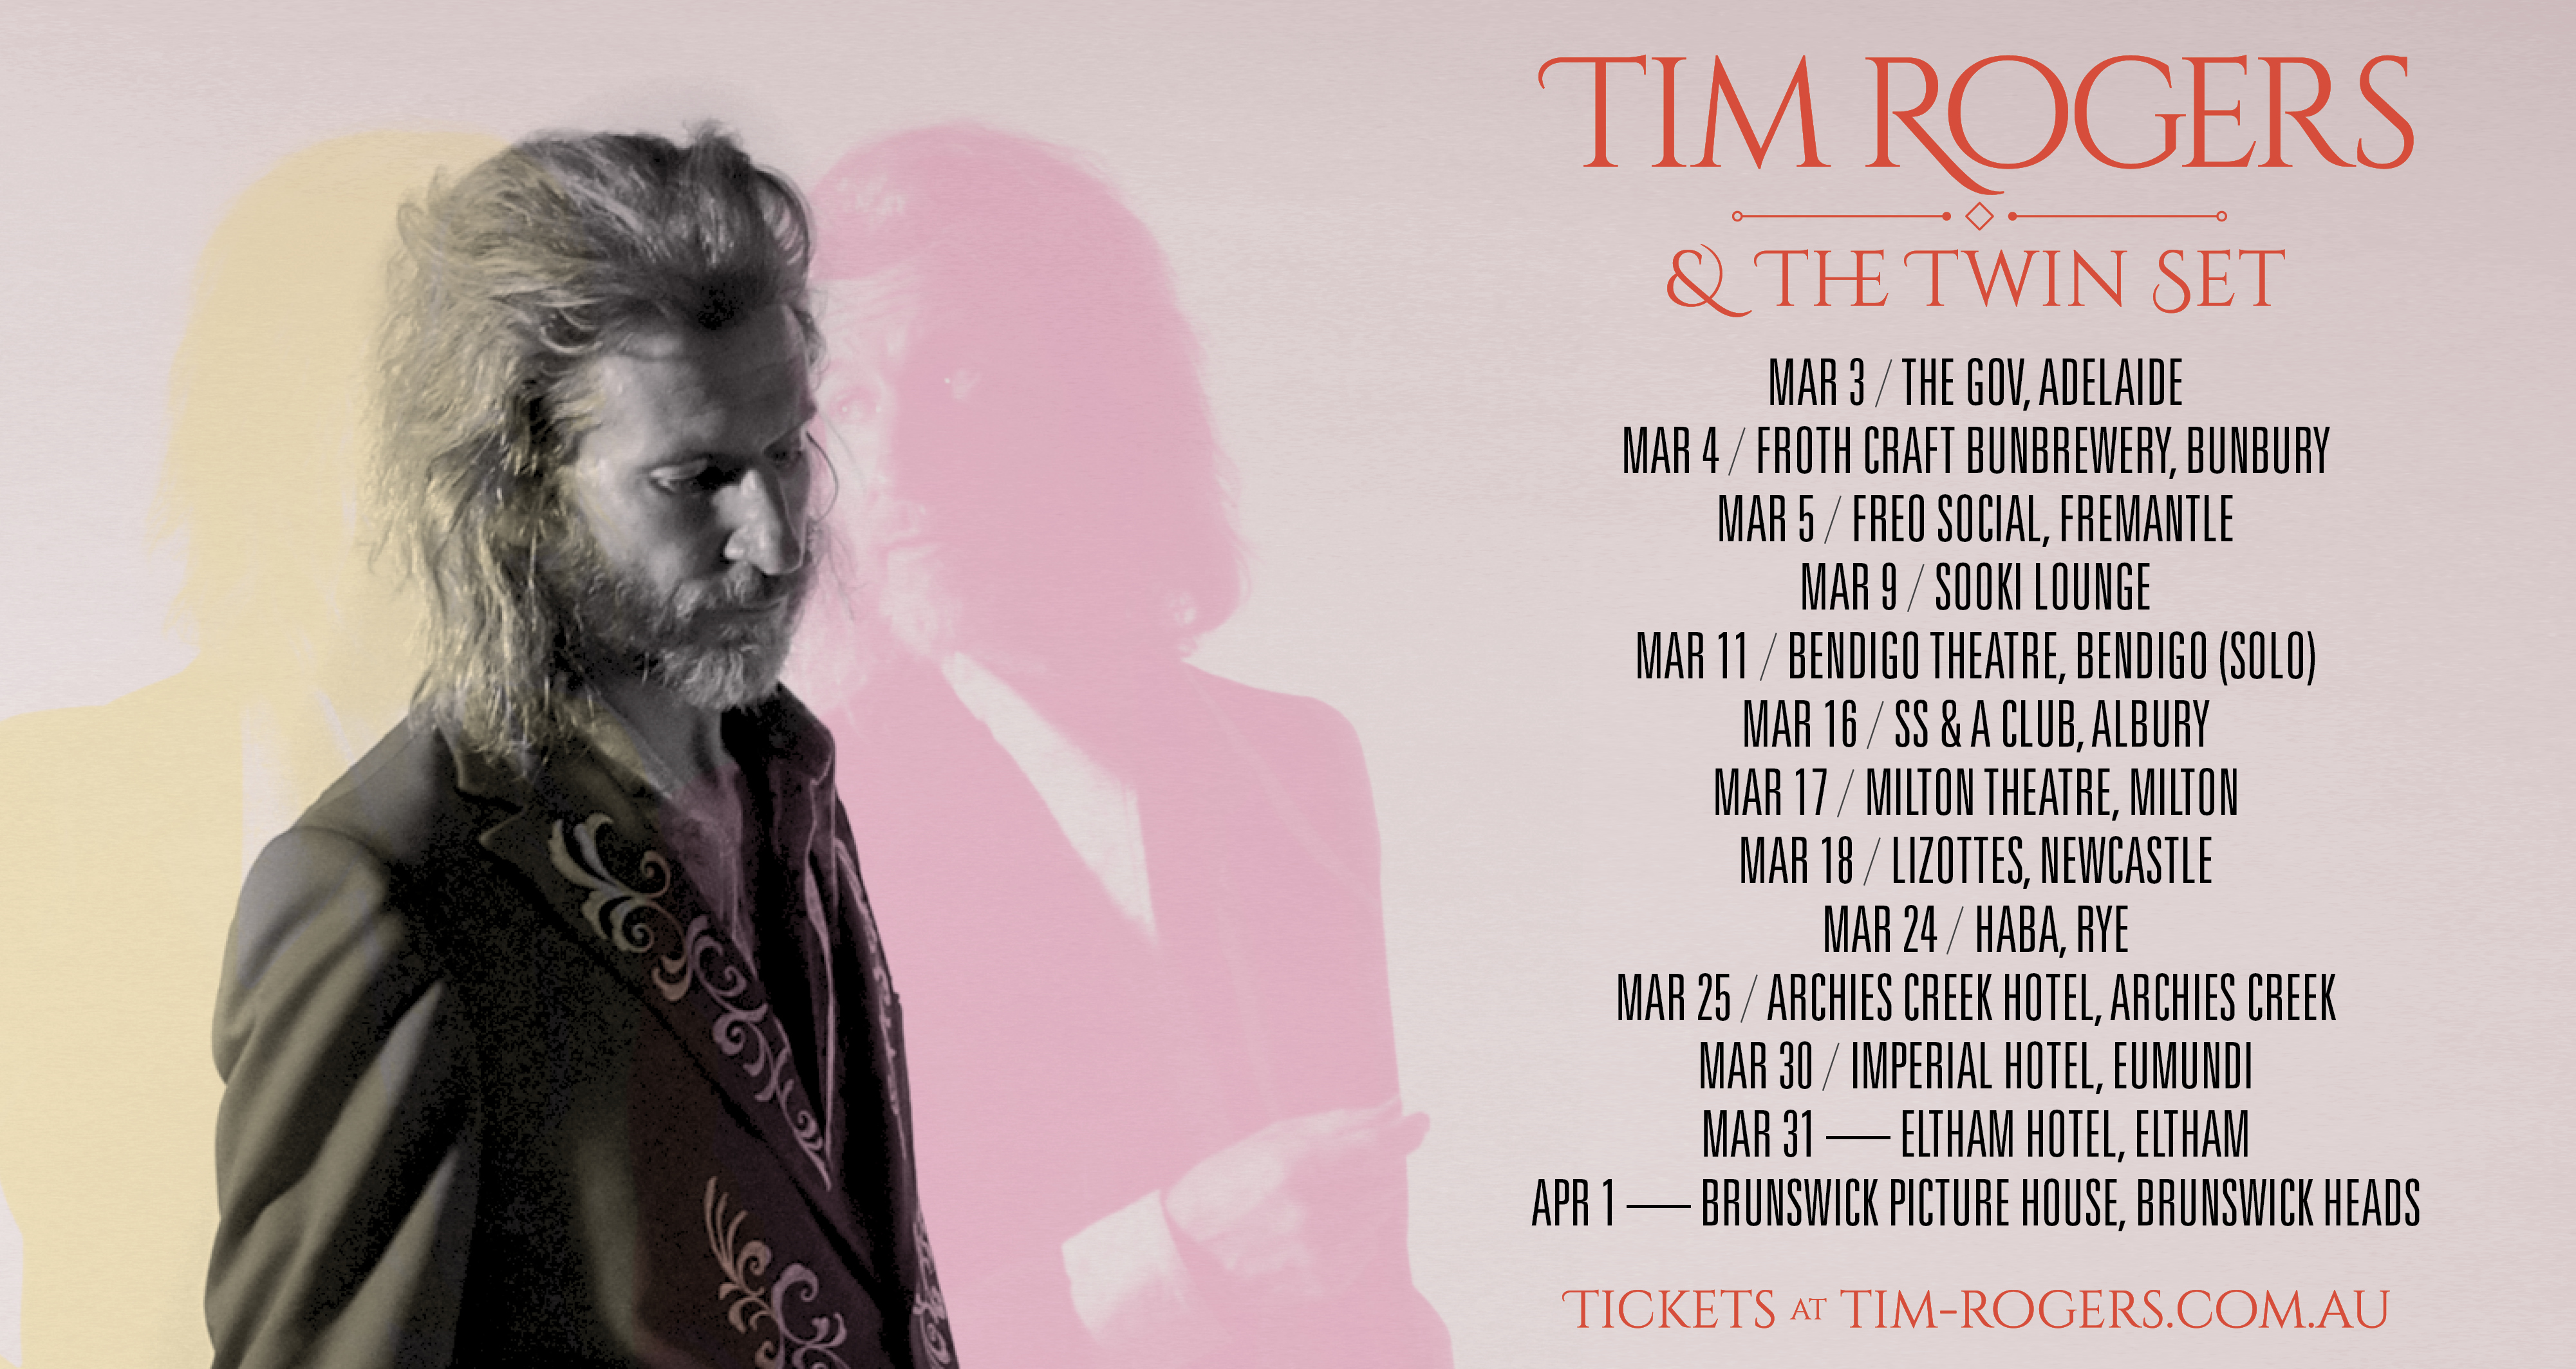 Tim Rogers & the Twin Set “Tines of Stars Unfurled” Tour 2023